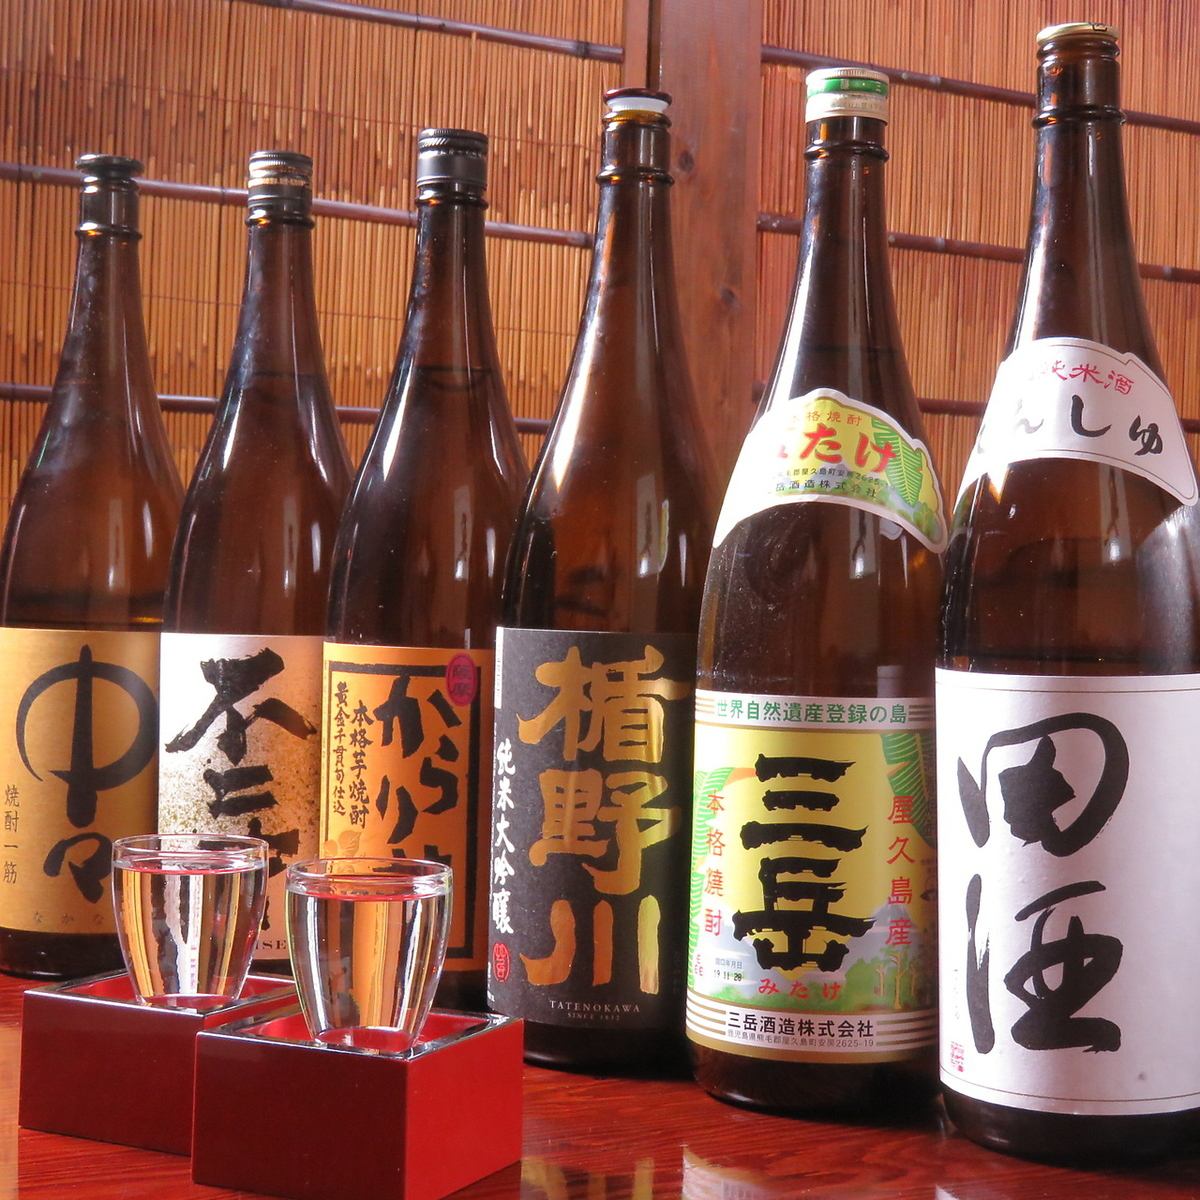 Please spend your time while enjoying our proud sake ♪